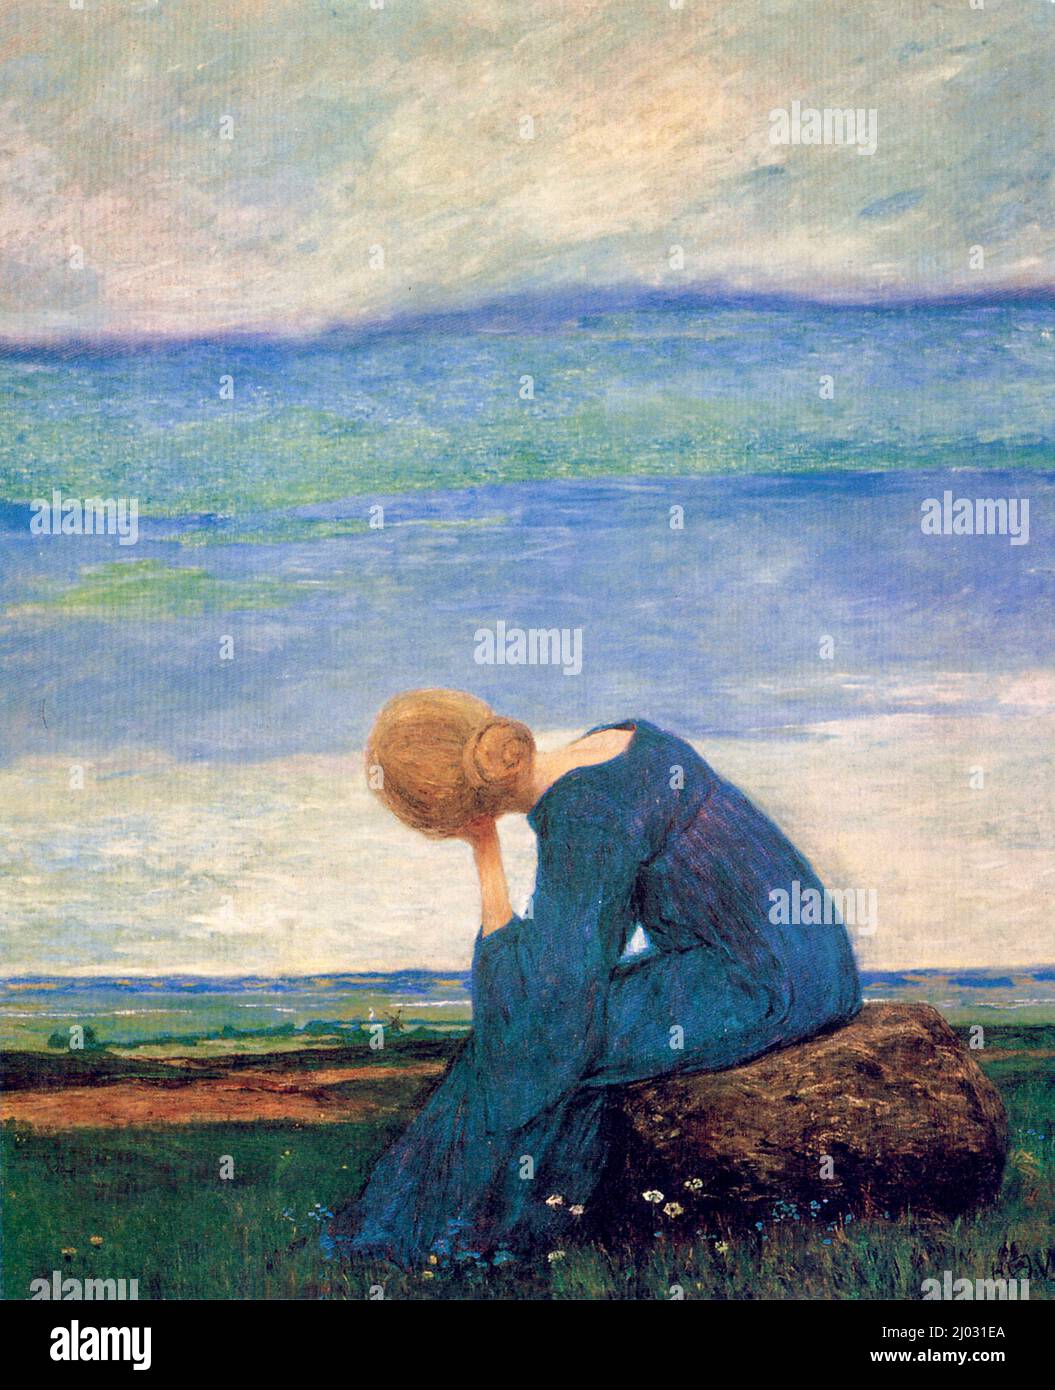 Heinrich Vogeler - A woman sits, head in hand, regarding the land and skycape, longing, dreaming - sehnsucht Stock Photo